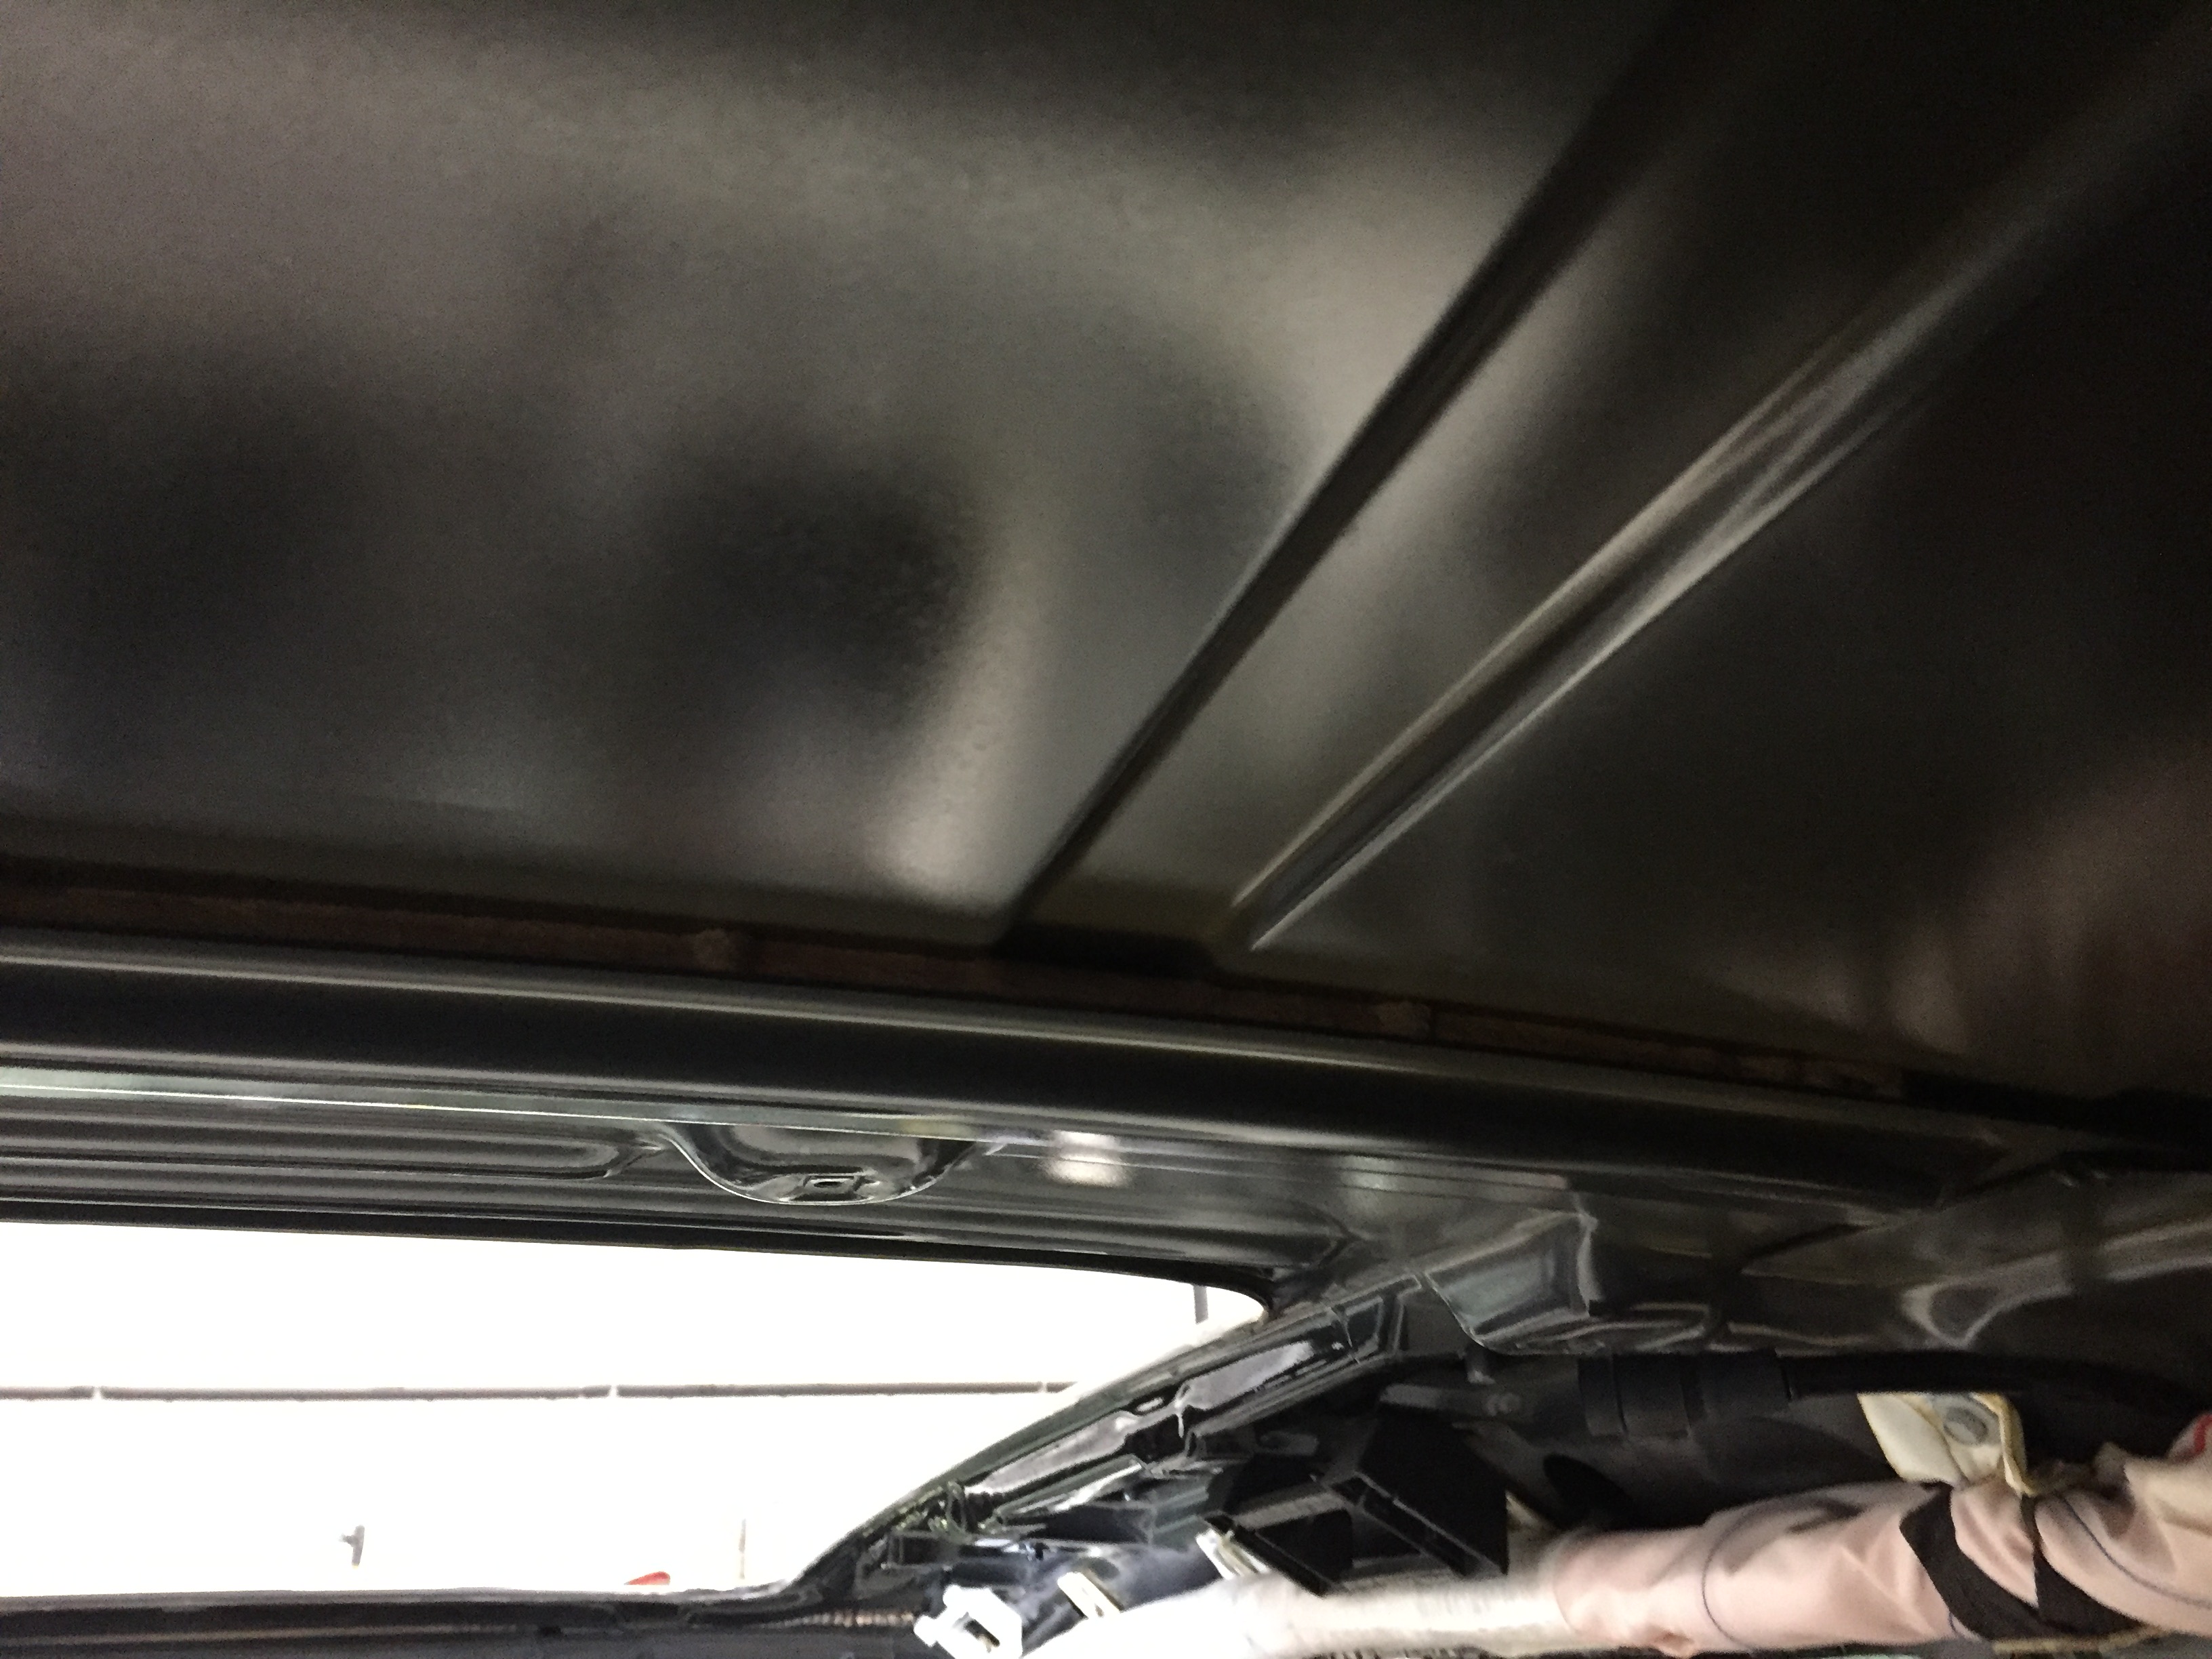 A Peek Under The Headliner of the 2013 Grand Cherokee Dual-Plane Sunroof Removal Pictures. Springfield IL, Pana IL Taylorville IL 217hail.com 217dent.com